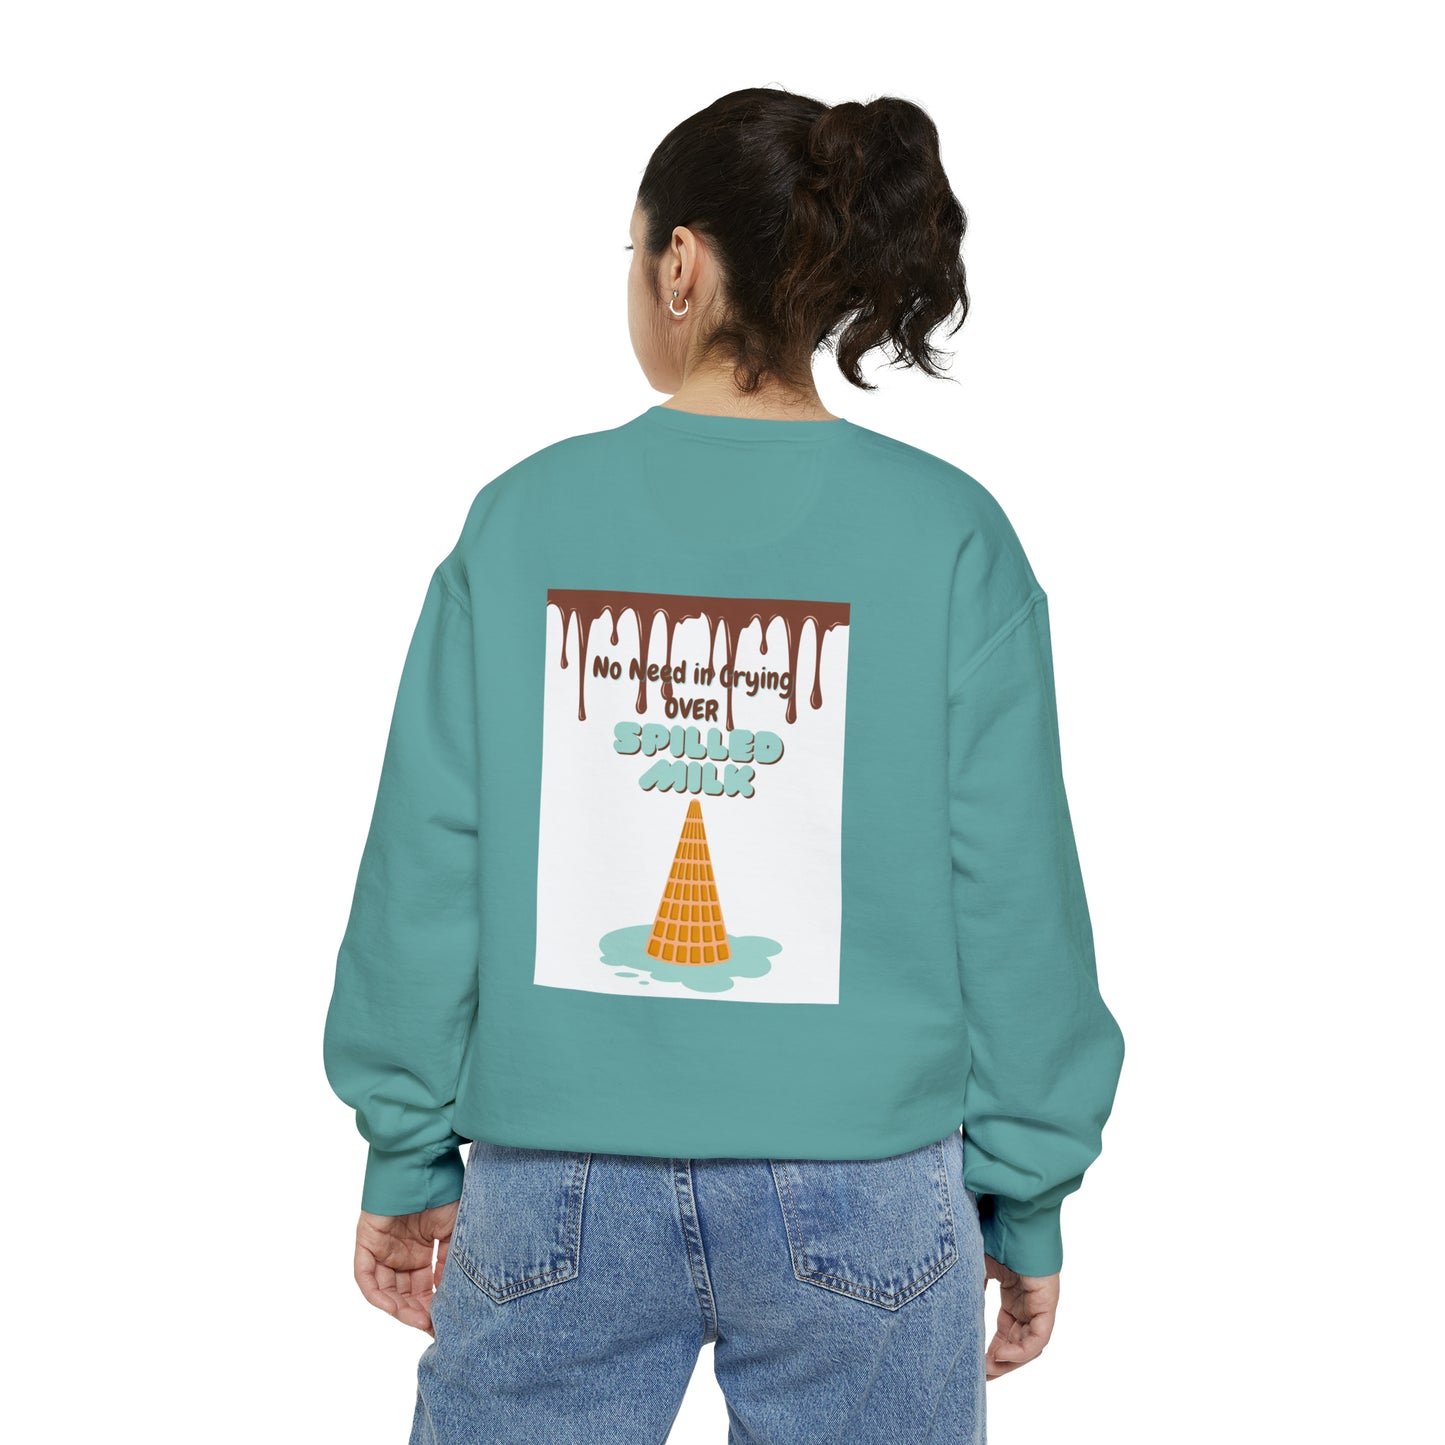 Unisex Garment-Dyed "What's Mint to be will be"- White background Sweatshirt